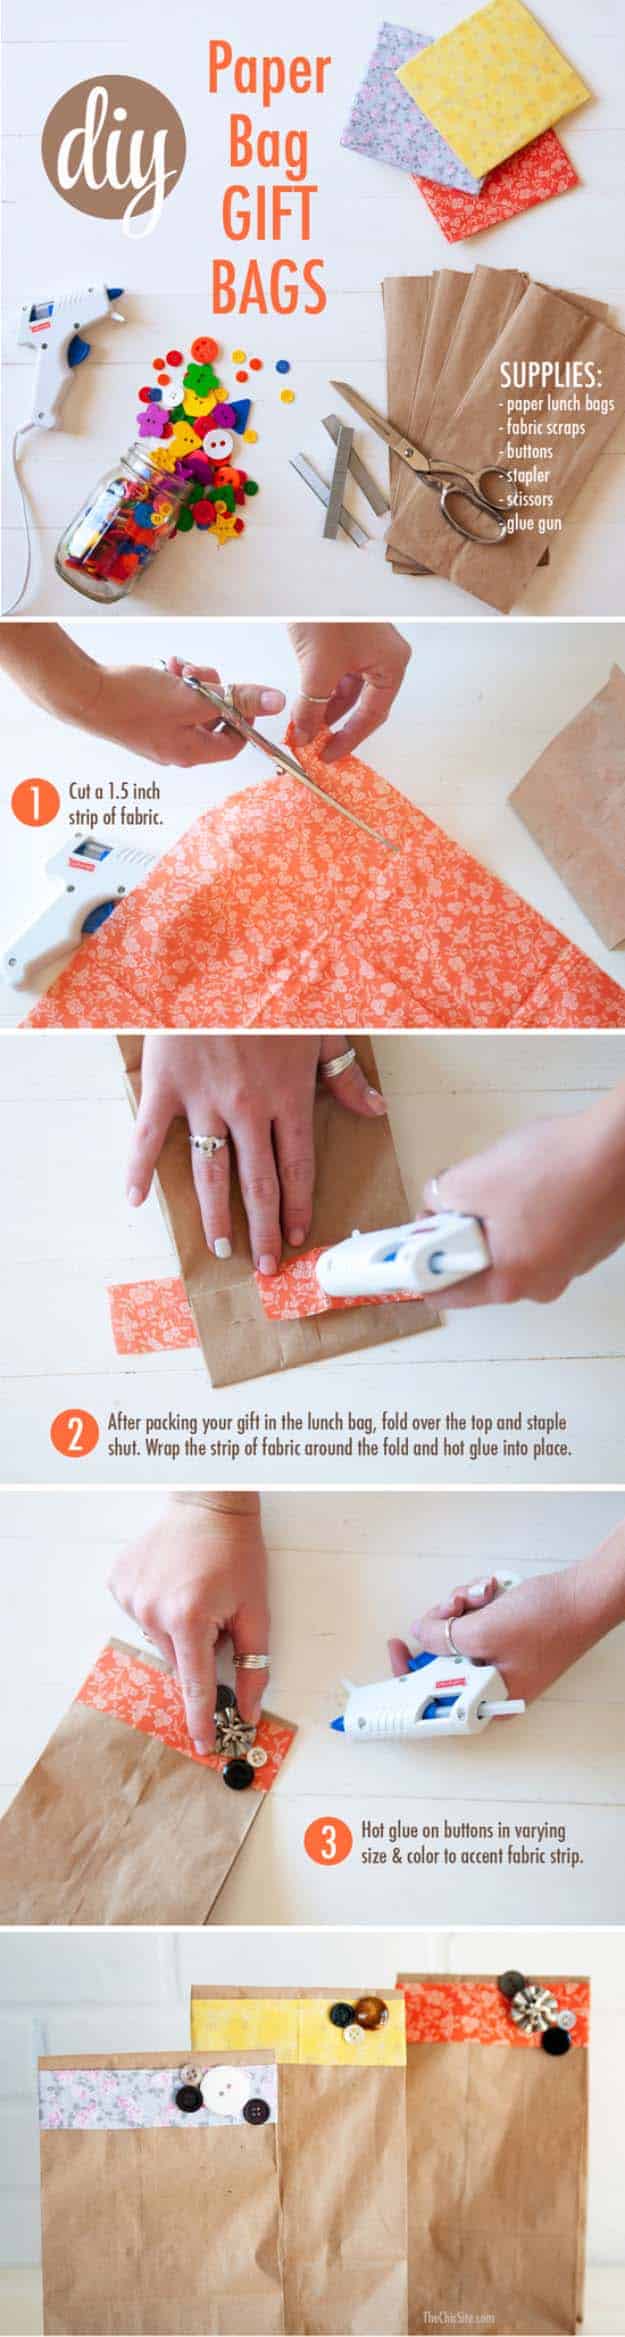 DIY Gift Wrapping Ideas - How To Wrap A Present - Tutorials, Cool Ideas and Instructions | Cute Gift Wrap Ideas for Christmas, Birthdays and Holidays | Tips for Bows and Creative Wrapping Papers | Paper Bag Gift Wrap #gifts #diys